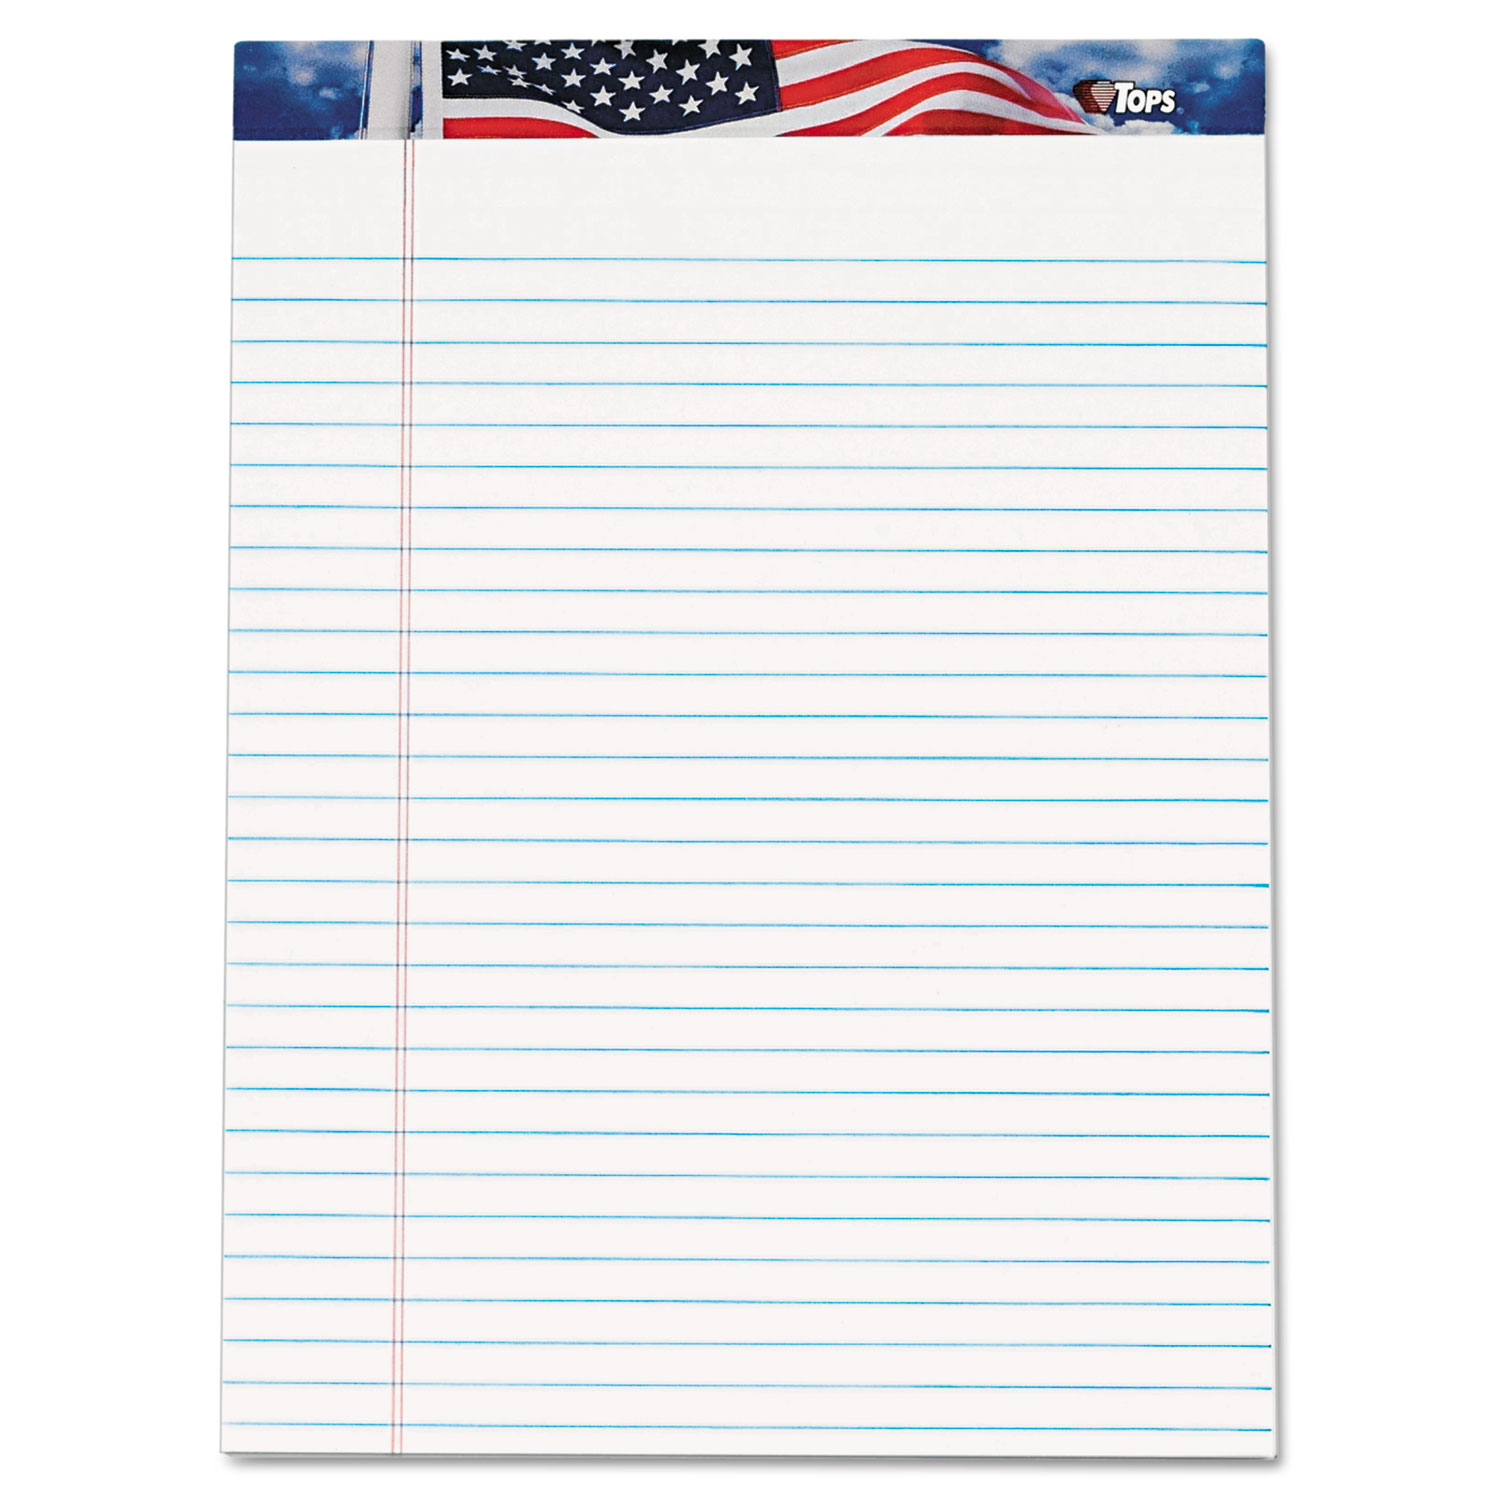  TOPS 75111 American Pride Writing Pad, Wide/Legal Rule, 8.5 x 11.75, White, 50 Sheets, 12/Pack (TOP75111) 